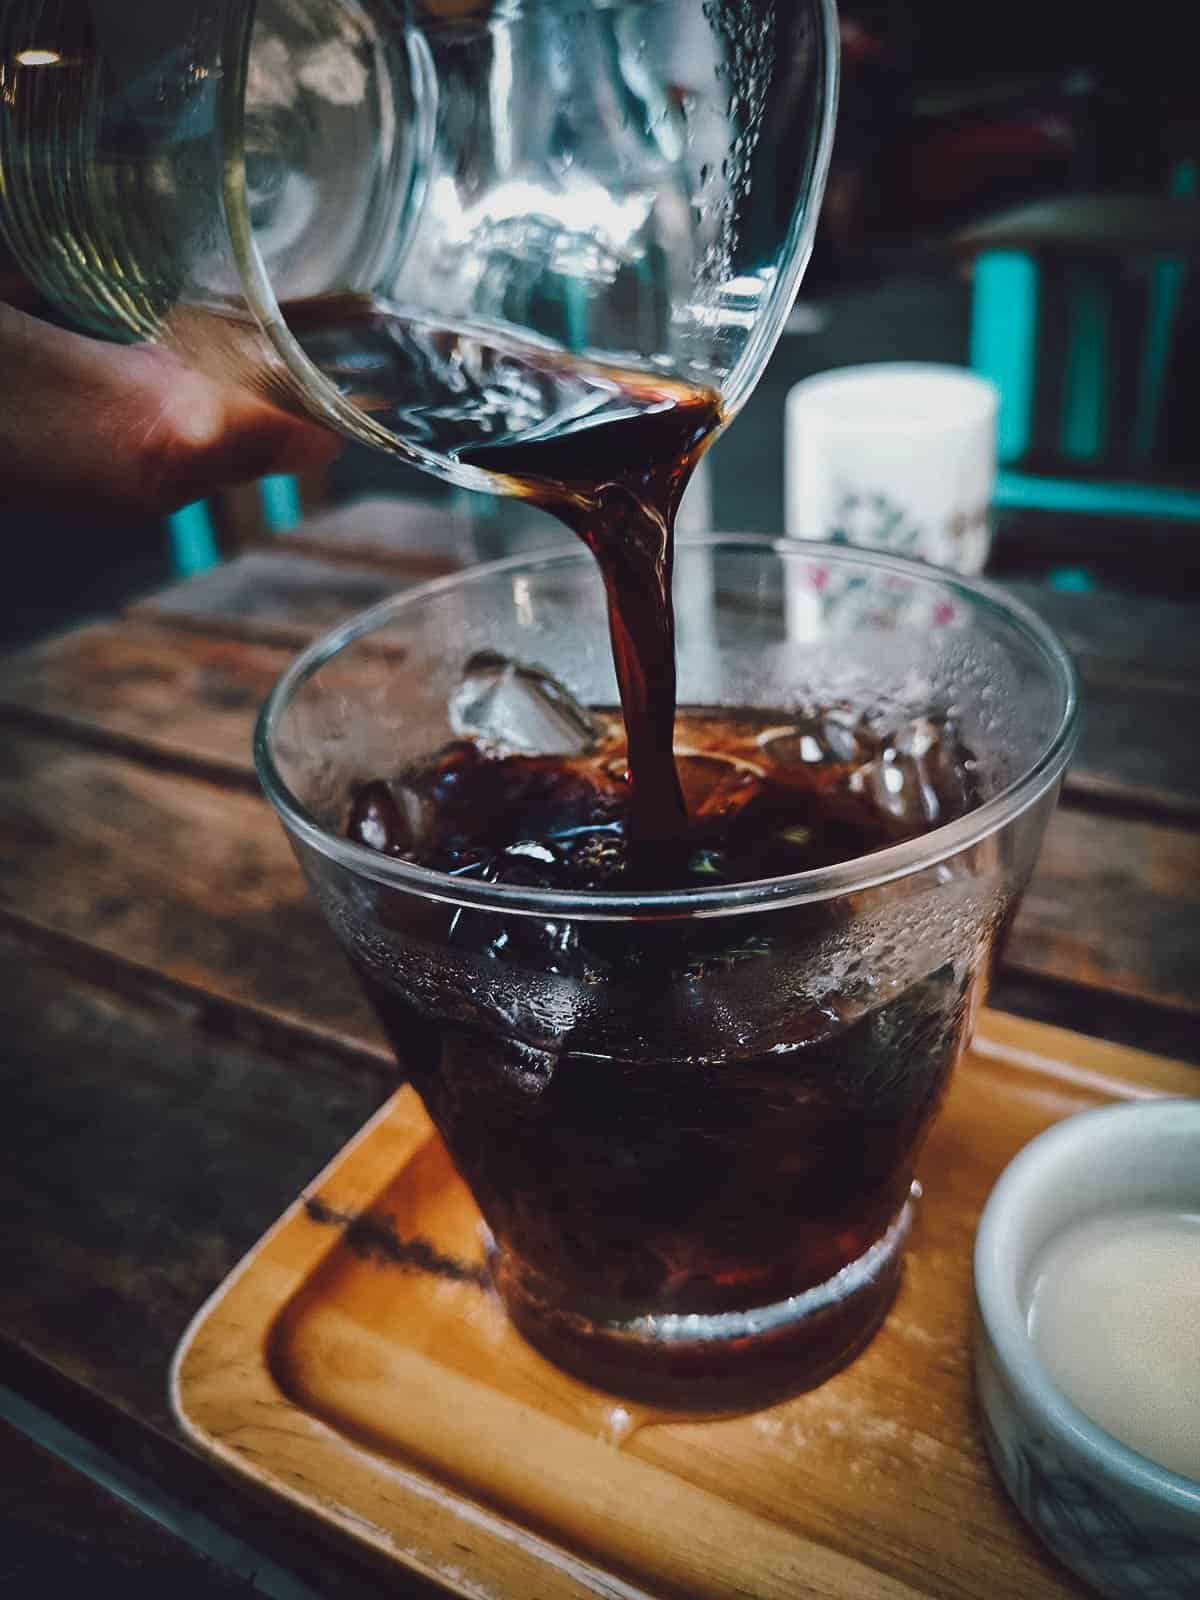 Pouring coffee into a glass with ice at Phin Coffee in Hoi An, Vietnam